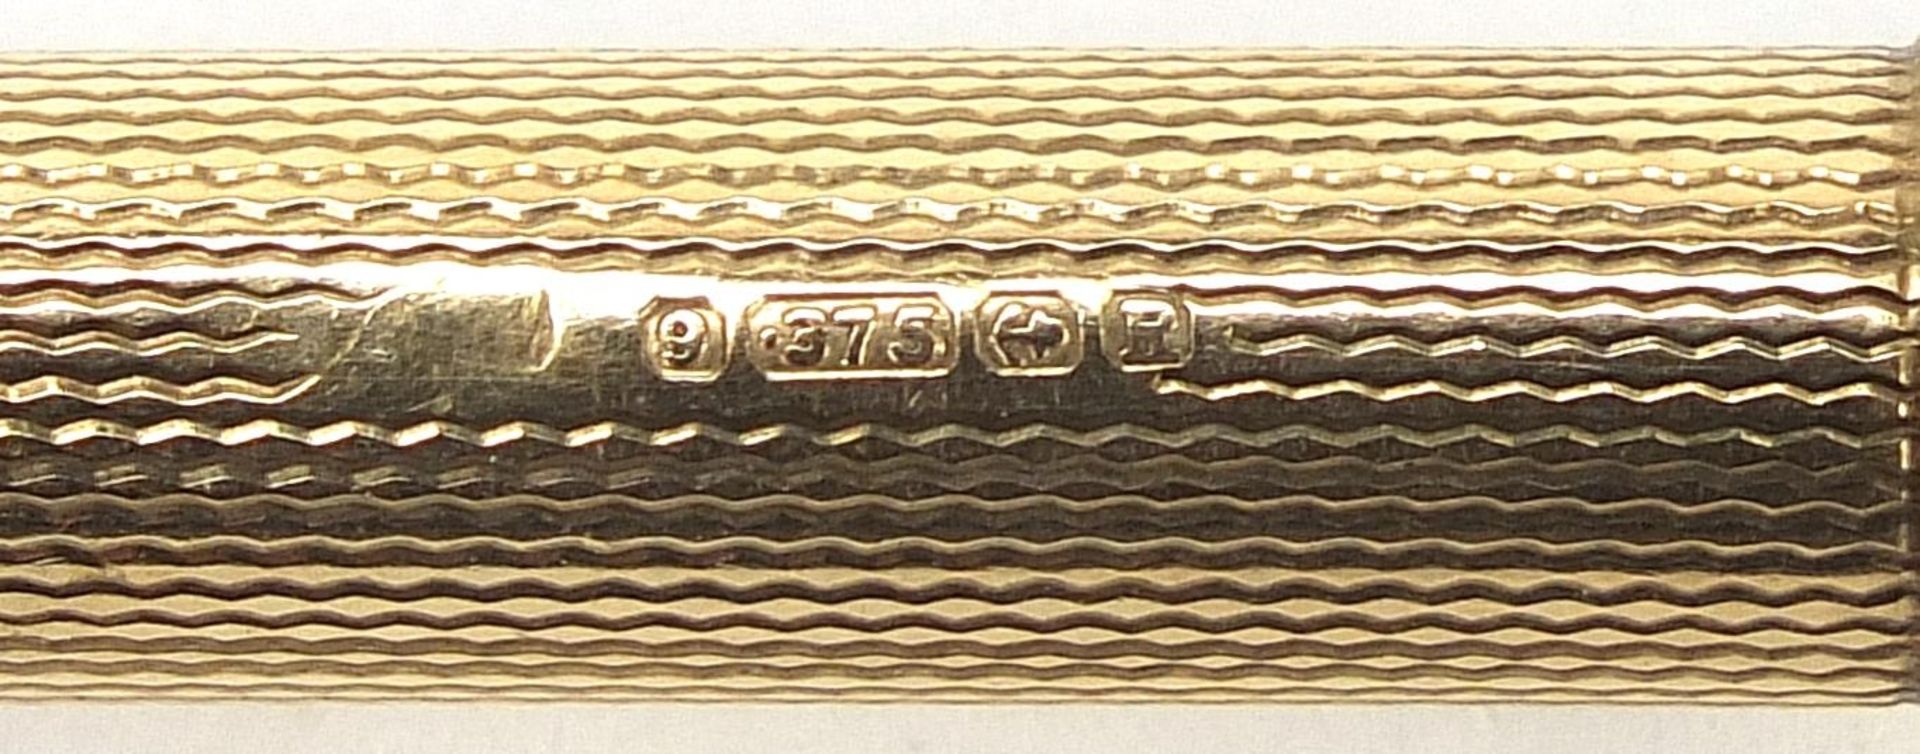 9ct gold cigar pricker with engine turned decoration, Birmingham 1941, 6.5cm in length, 7.2g : For - Image 4 of 4